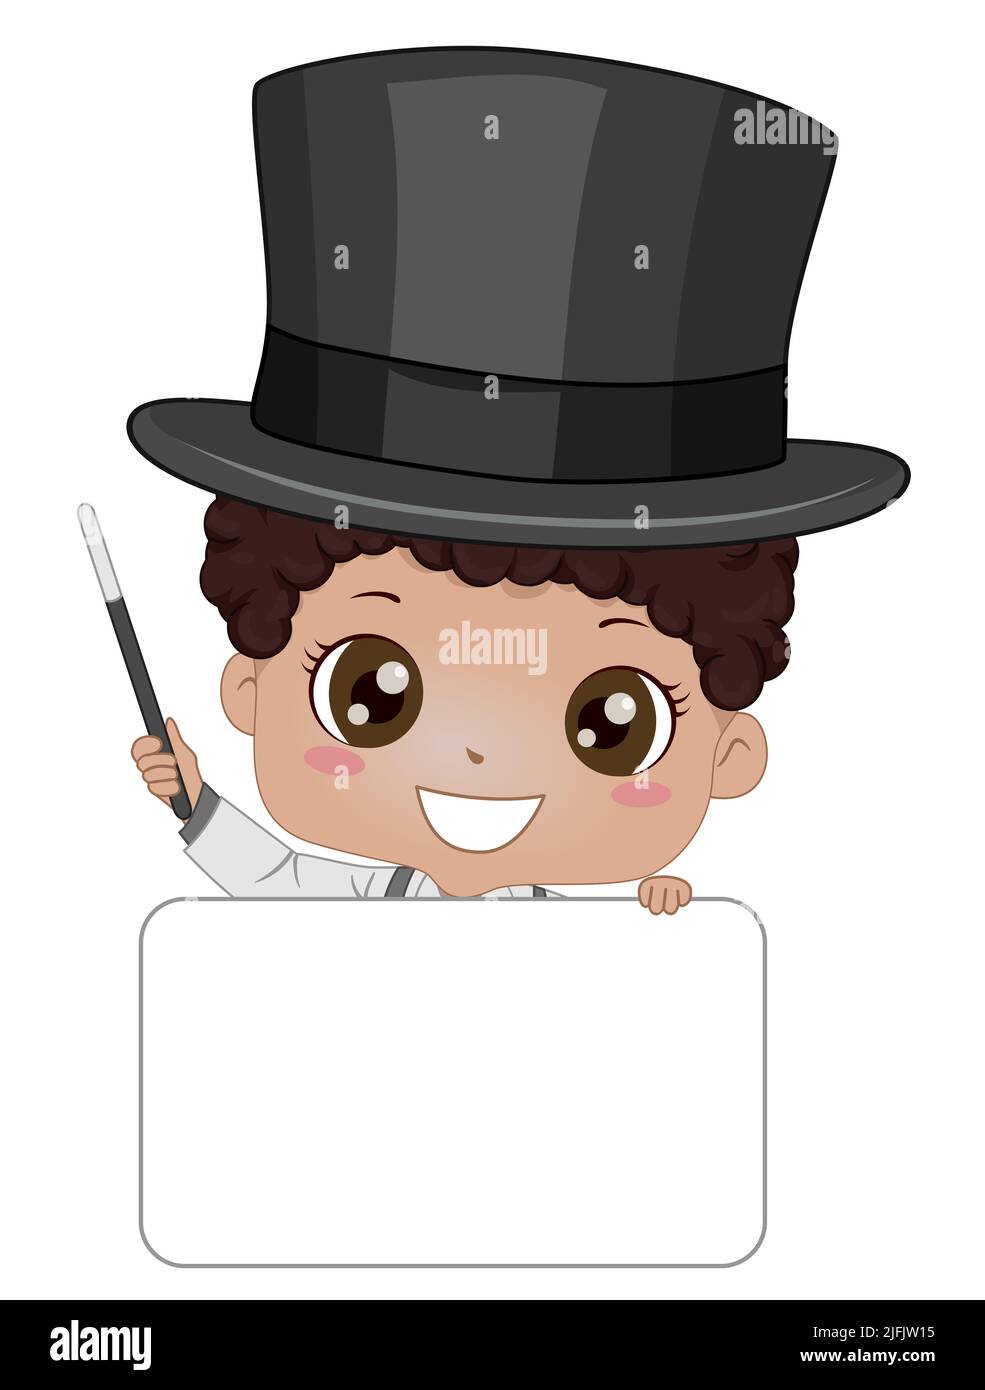 Illustration of African American Kid Boy Magician Wearing Top Hat Holding Blank Board and Magic Wand Stock Photo